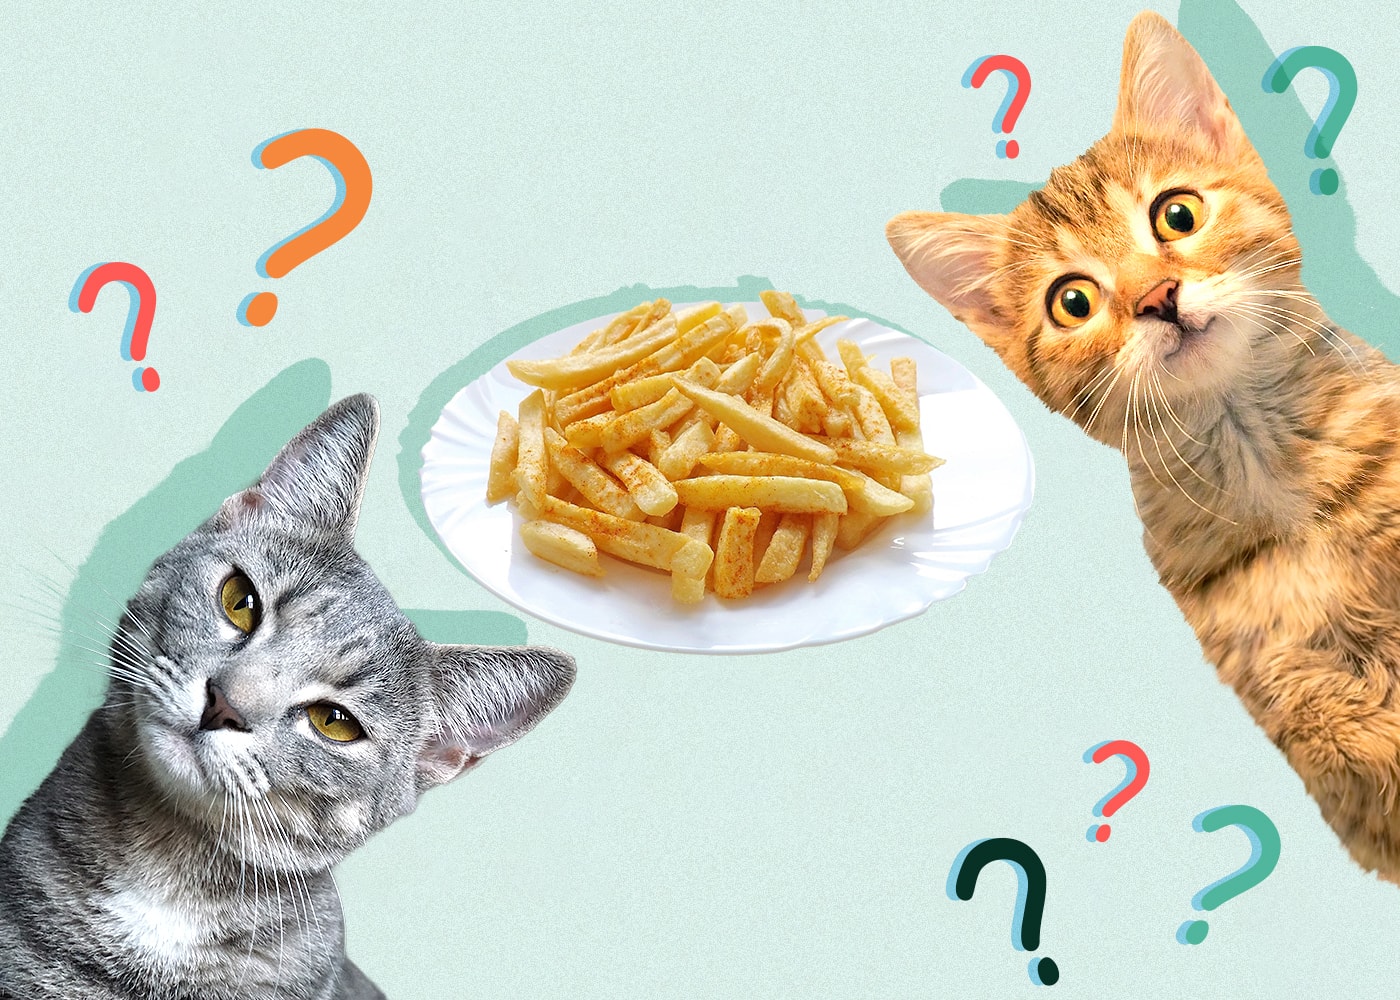 Can Cats Eat french fries